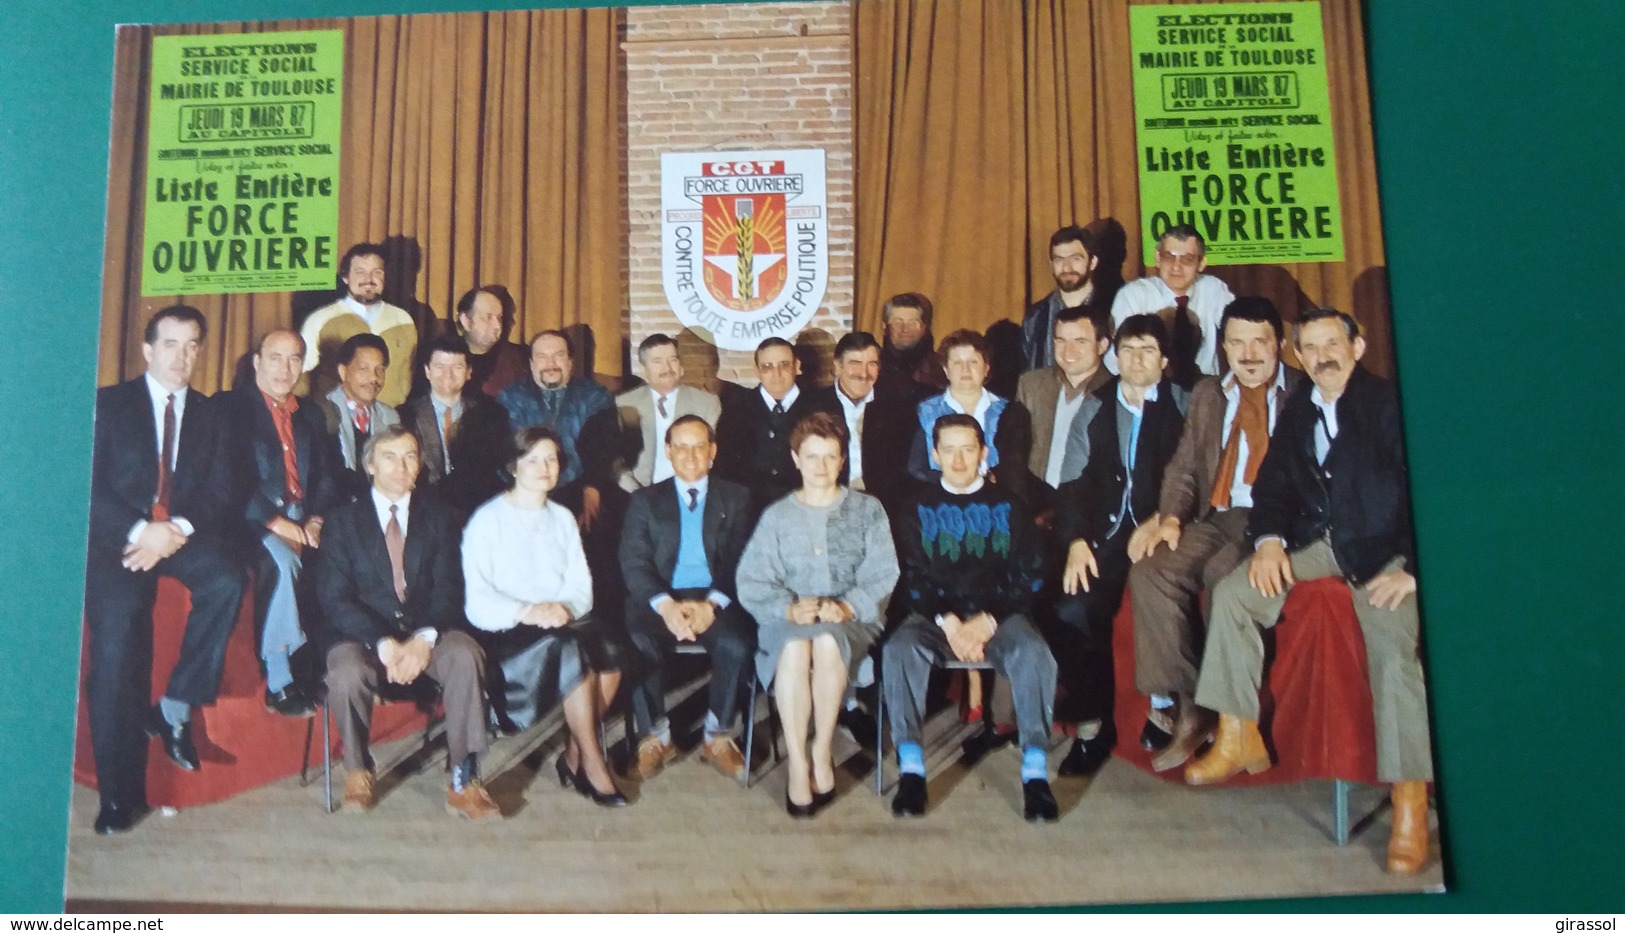 CPSM SYNDICAT FORCE OUVRIERE ELACTION MARS 1987 MAIRIE DE TOULOUSE ED LARREY EQUIPE CANDIDATS ? - Syndicats